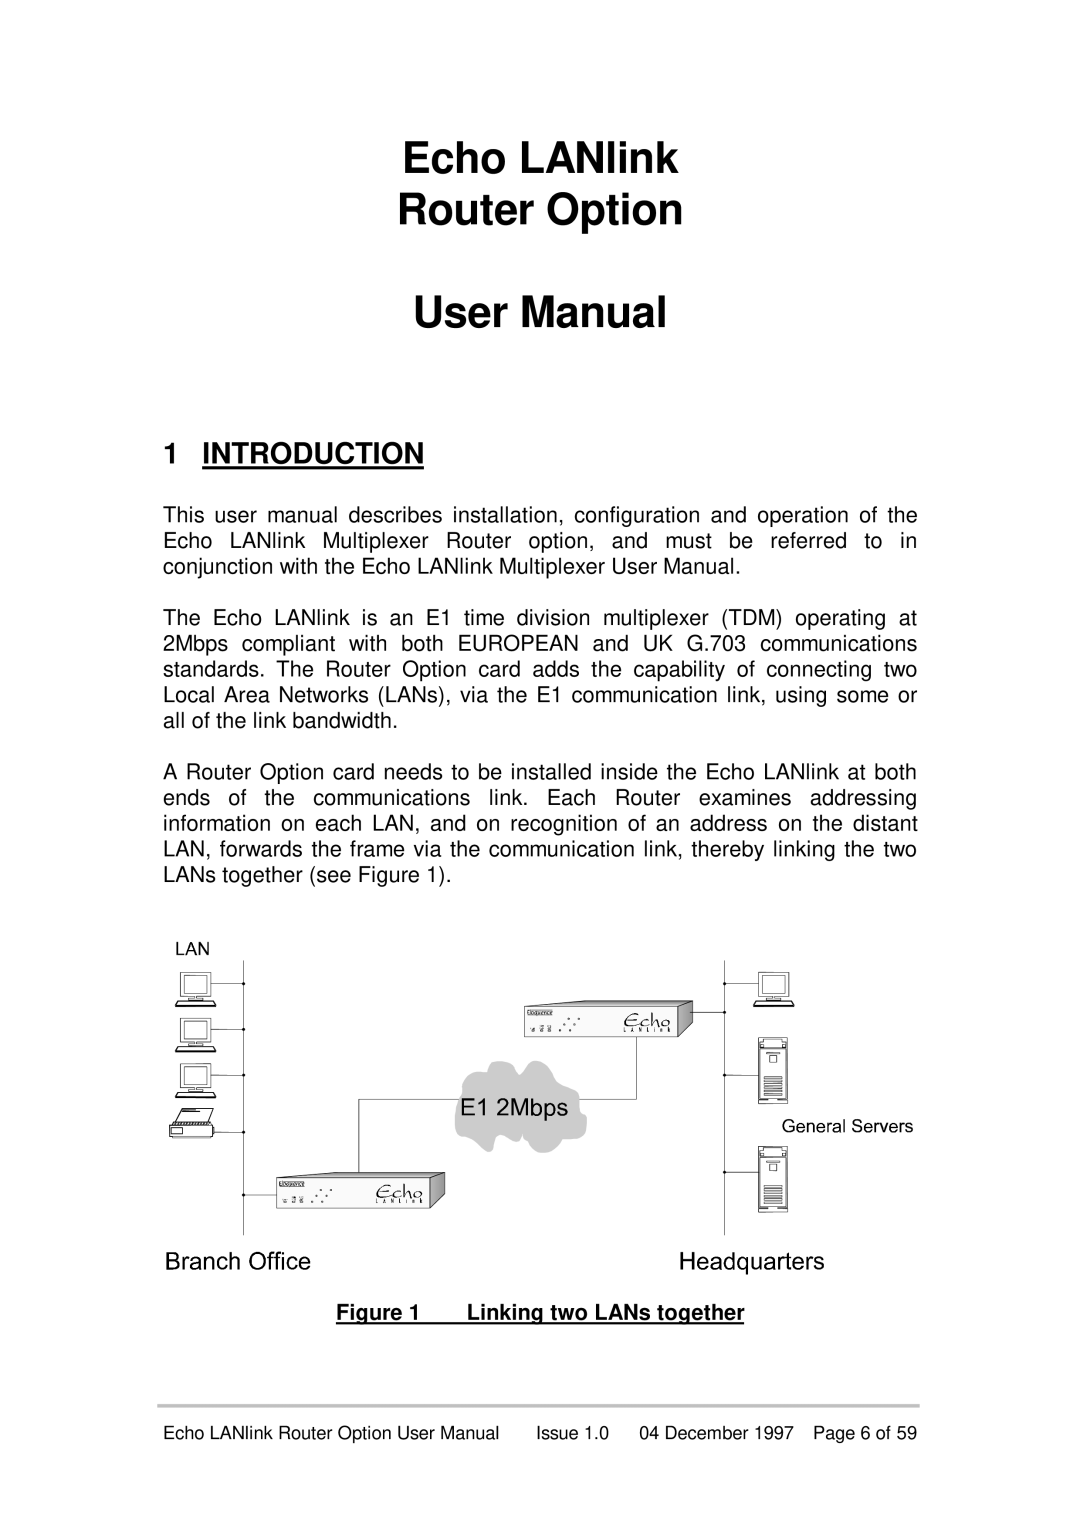 Echo EN55022 manual Echo LANlink Router Option User Manual, Introduction, Linking two LANs together 